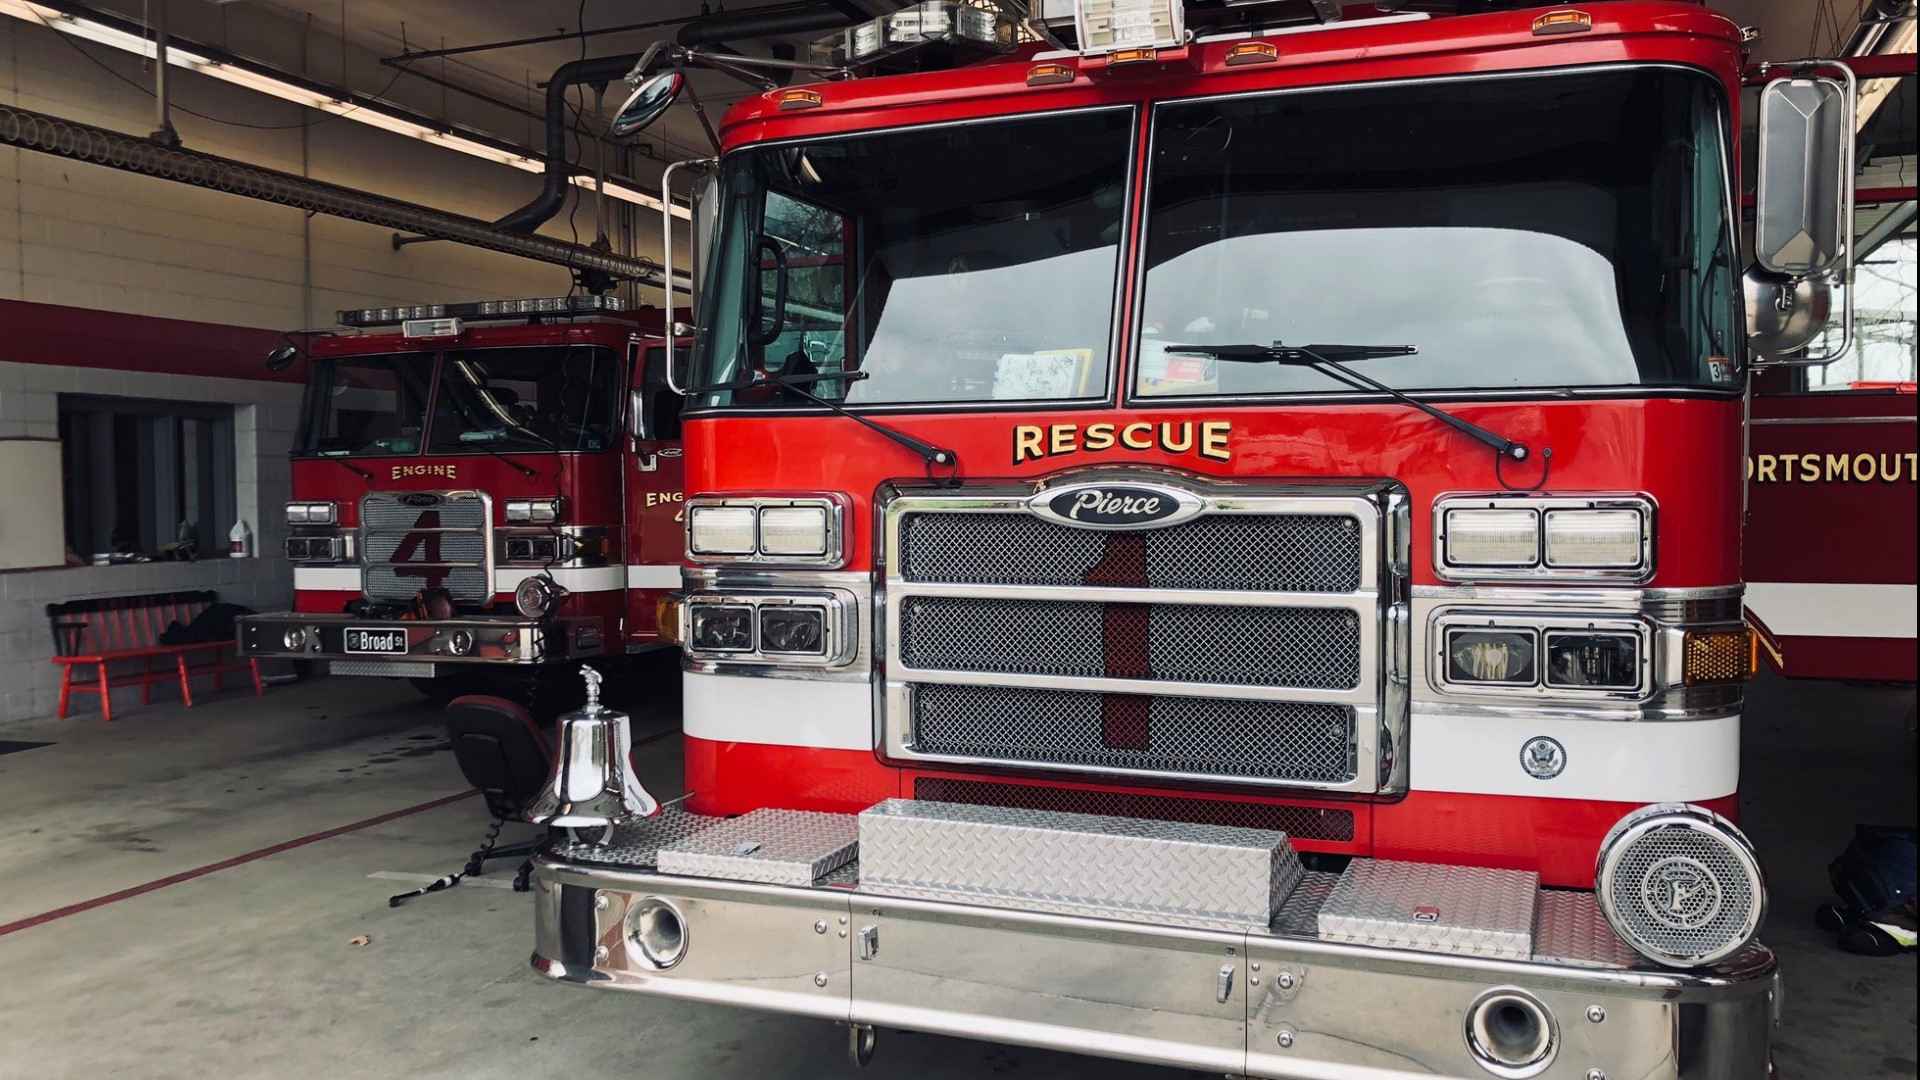 The department has four people at home self-isolating, and one person who was sick but has recovered. Fire and rescue teams are working overtime to stay staffed.